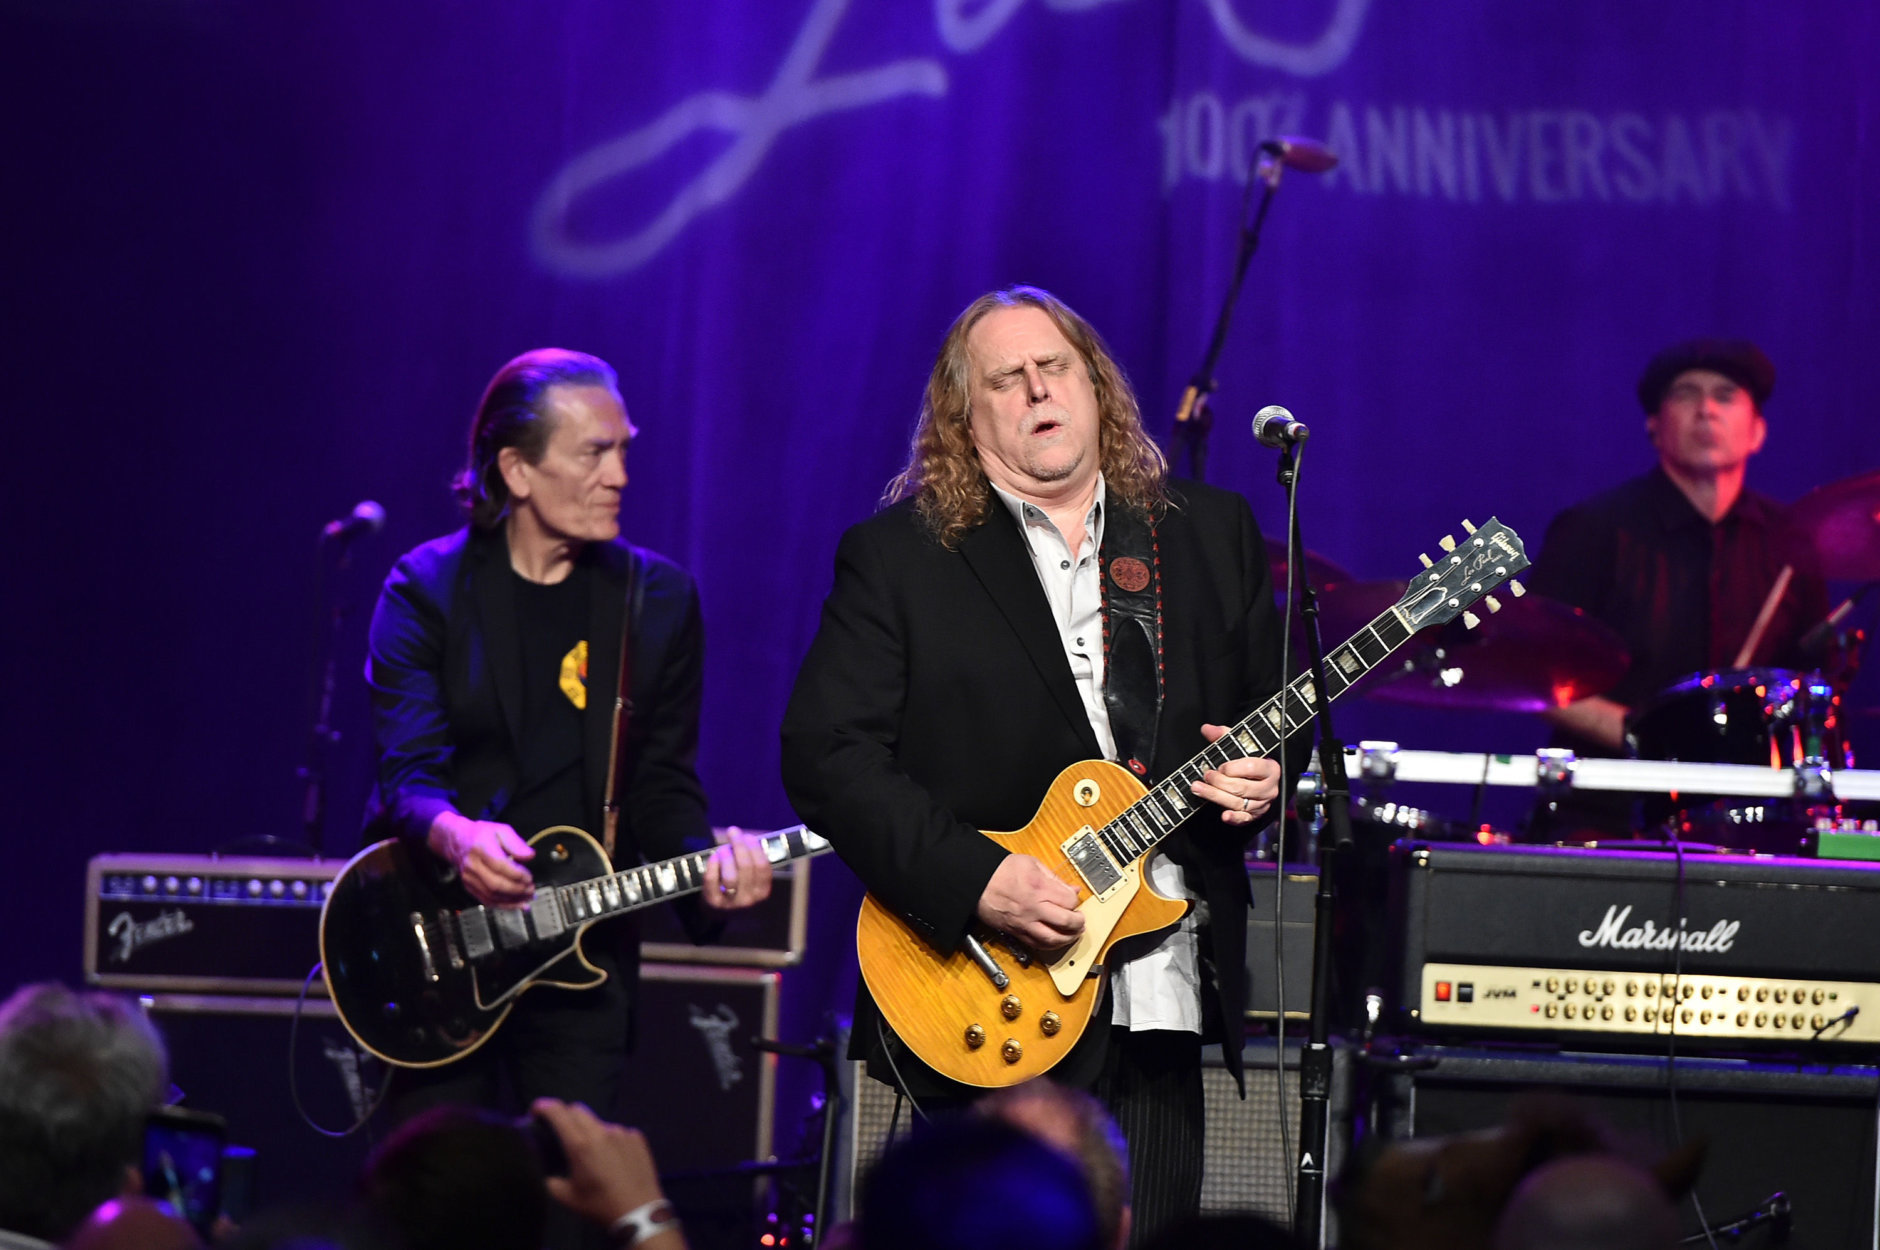 G.E. Smith and Warren Haynes perform on stage at the Les Paul 100th Anniversary Celebration on June 9, 2015 in New York City.  (Photo by Theo Wargo/Getty Images for Les Paul Foundation)